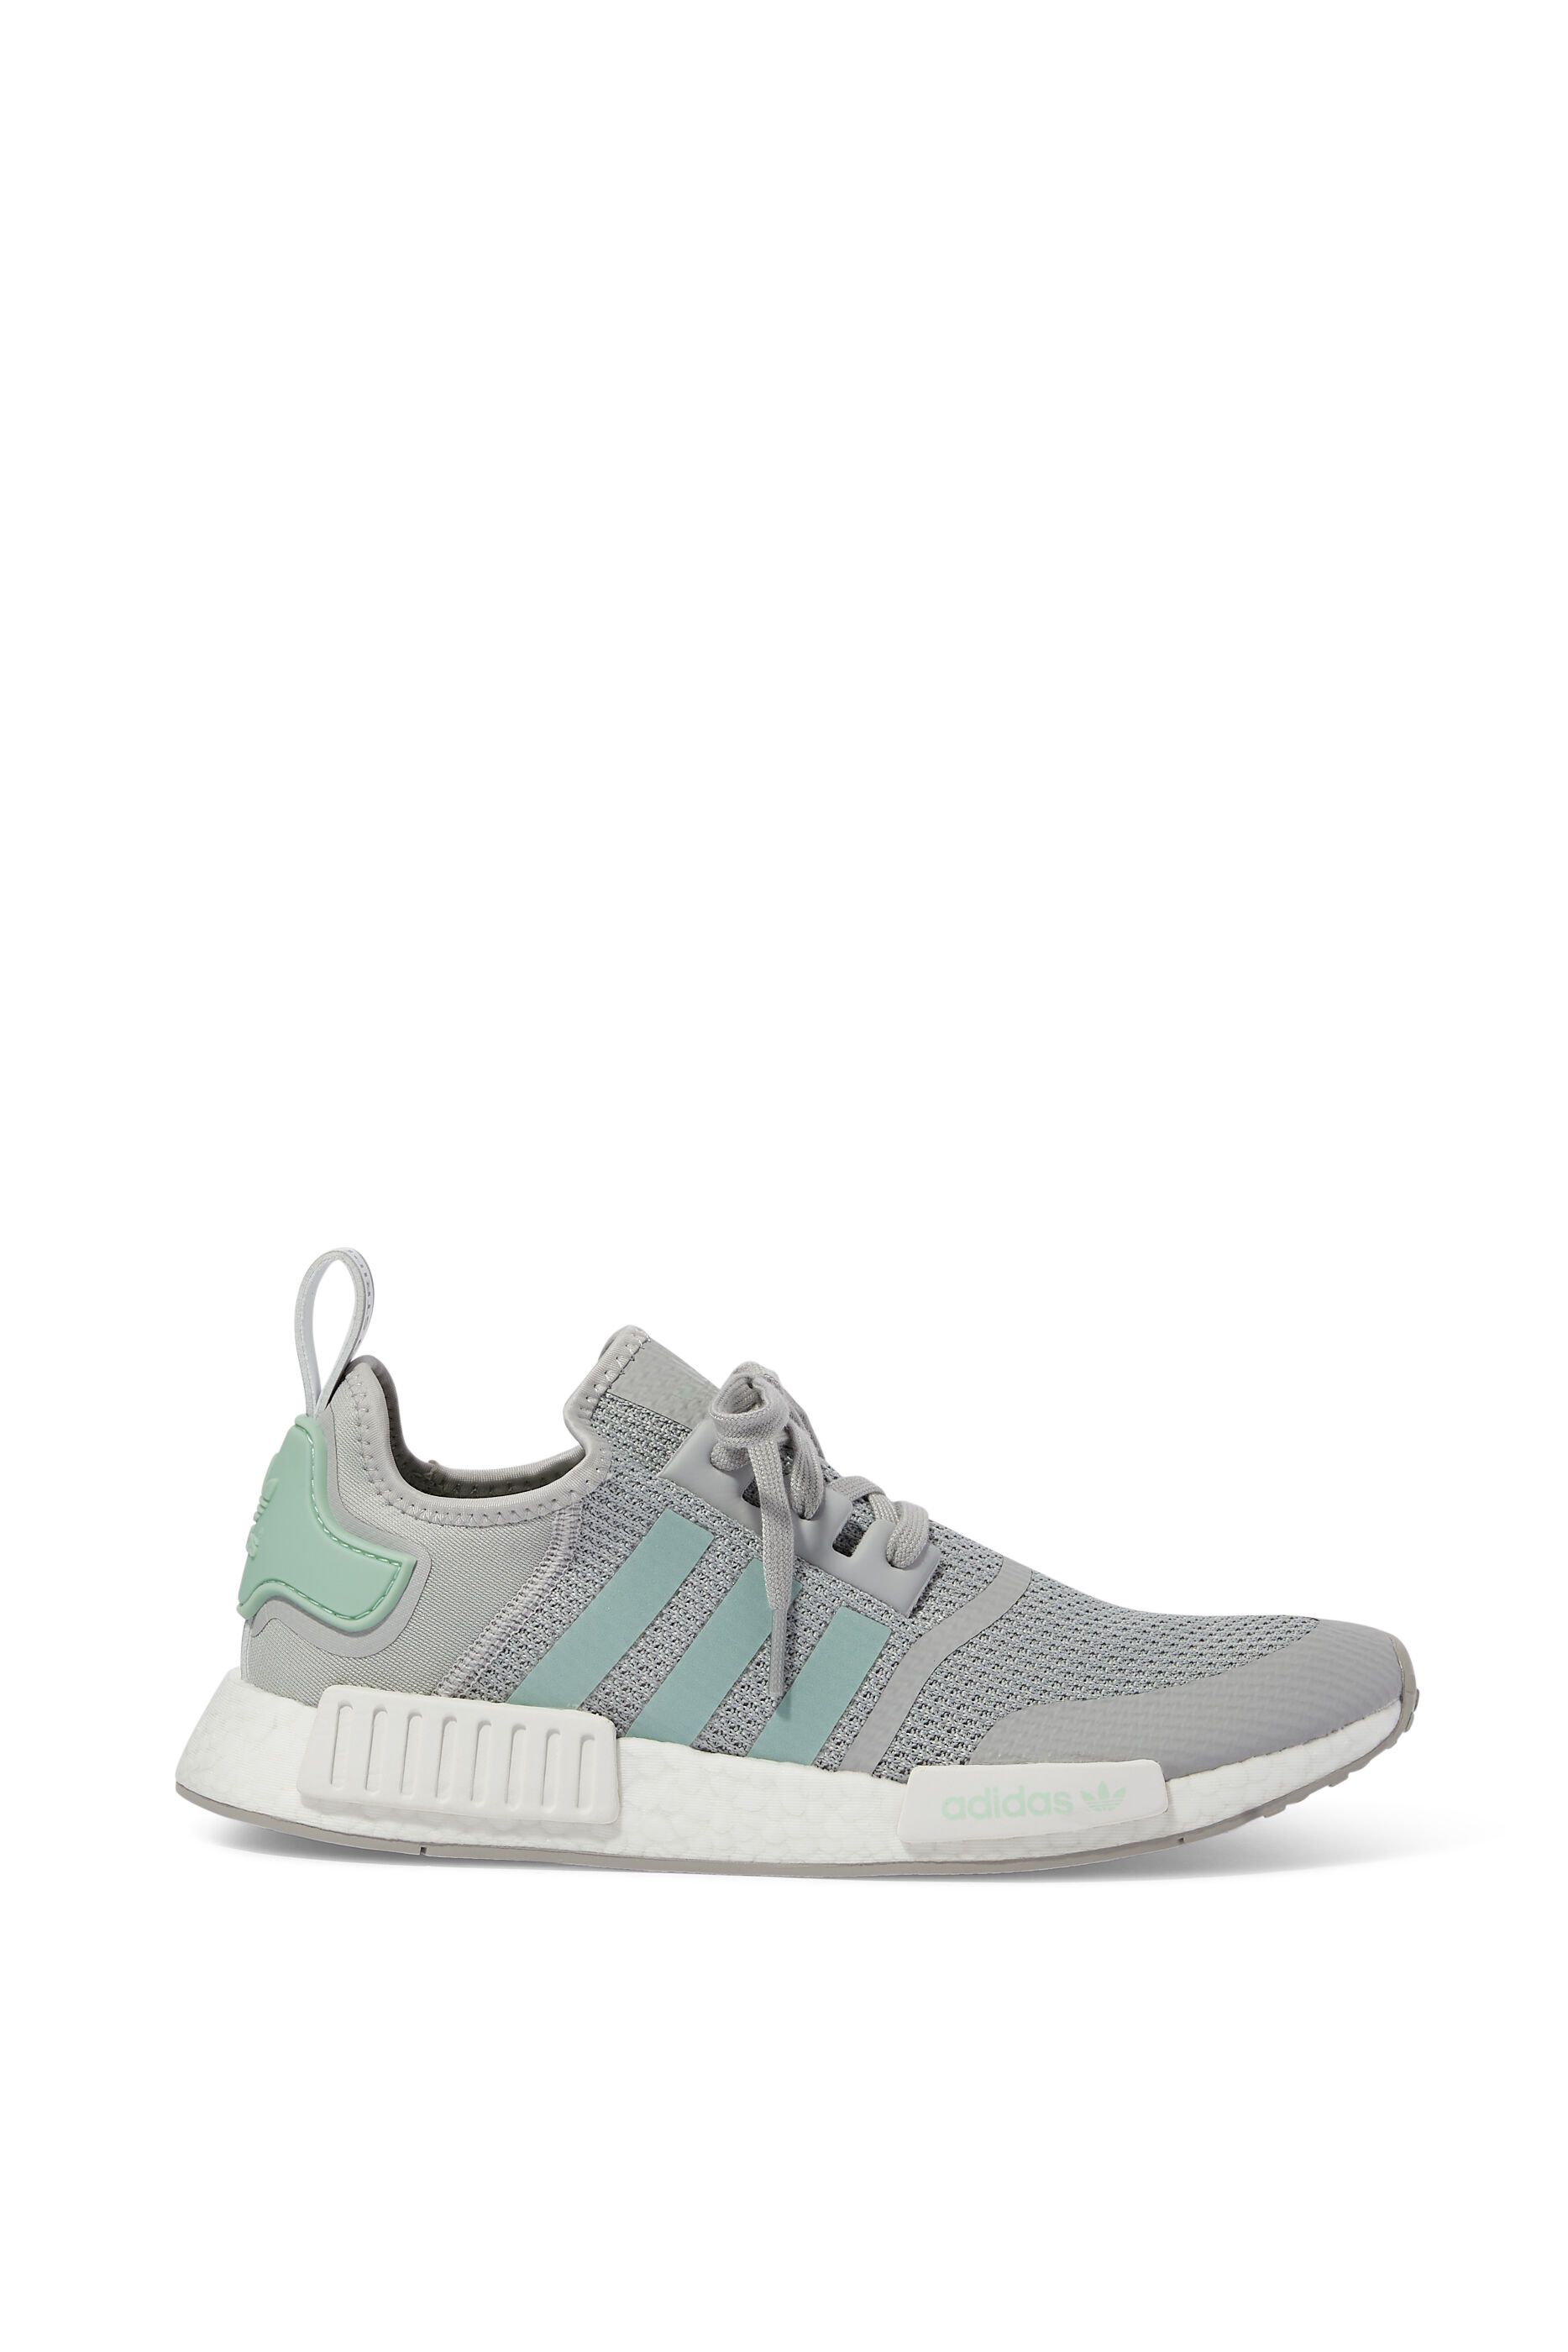 nmds shoes mens